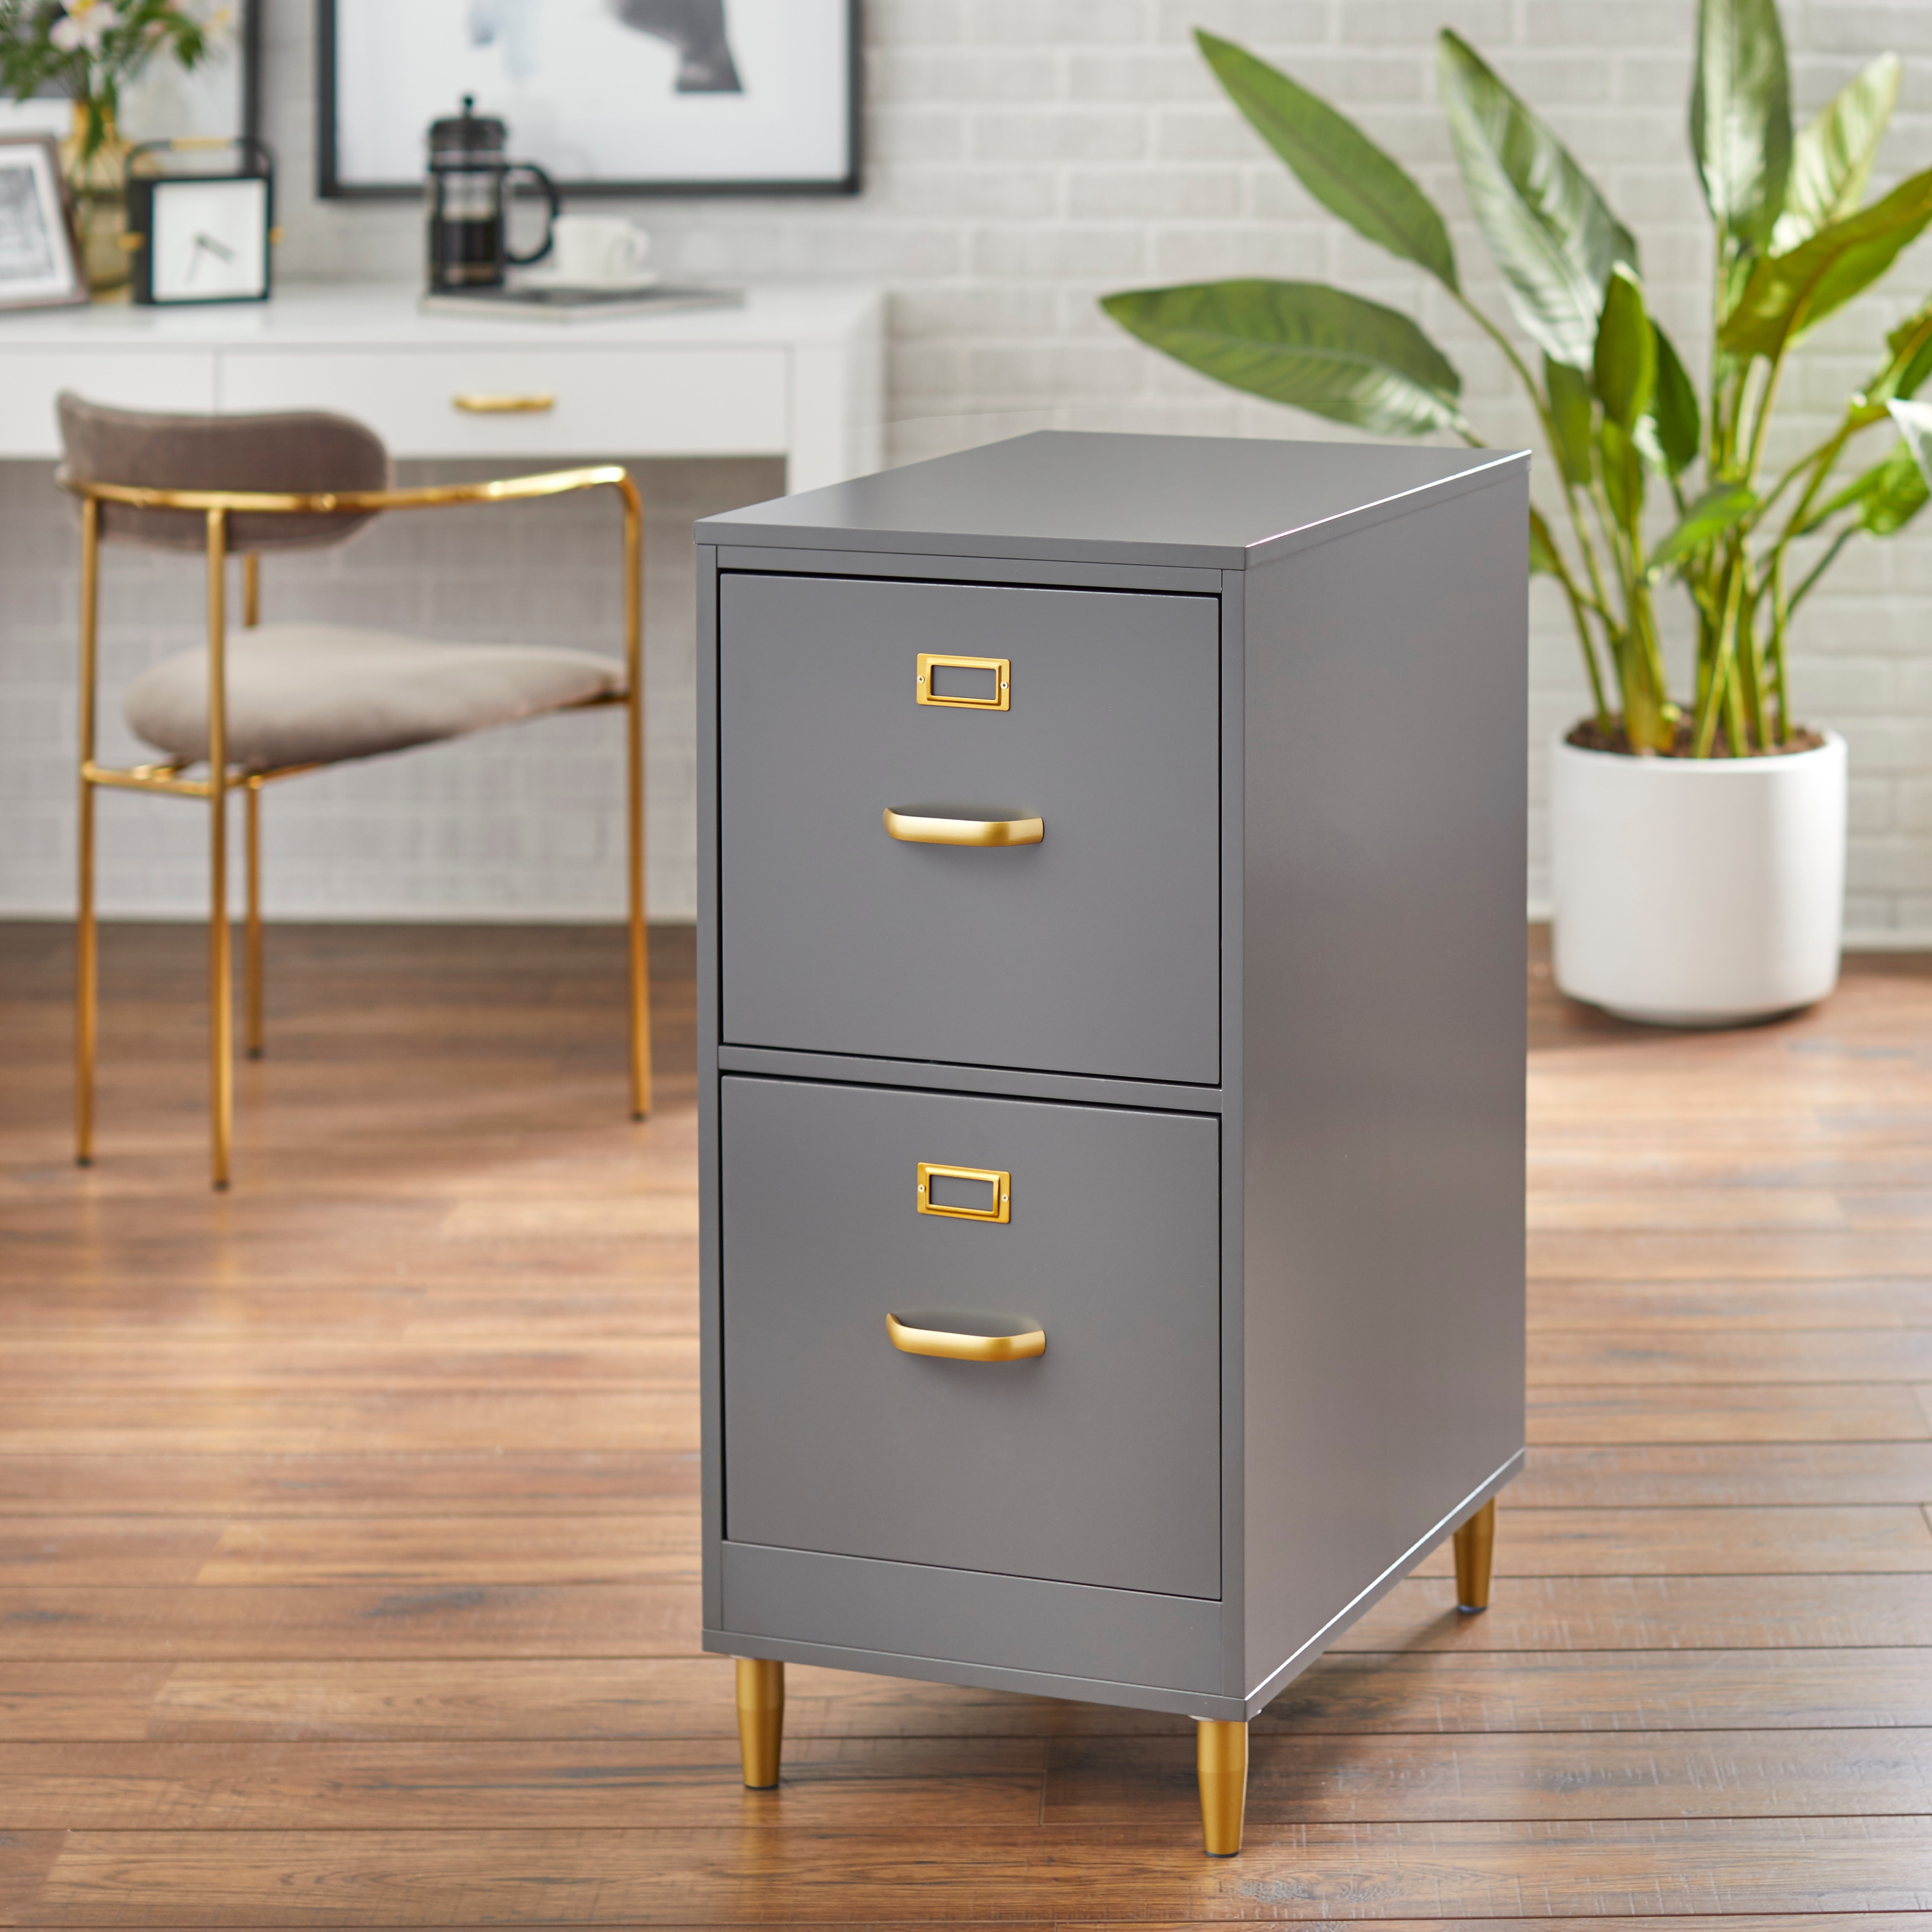 https://ak1.ostkcdn.com/images/products/is/images/direct/76f45b9394be53d40607989580fcc0aebb3de2d1/Carson-Carrington-Erfjord-2-drawer-File-Cabinet.jpg